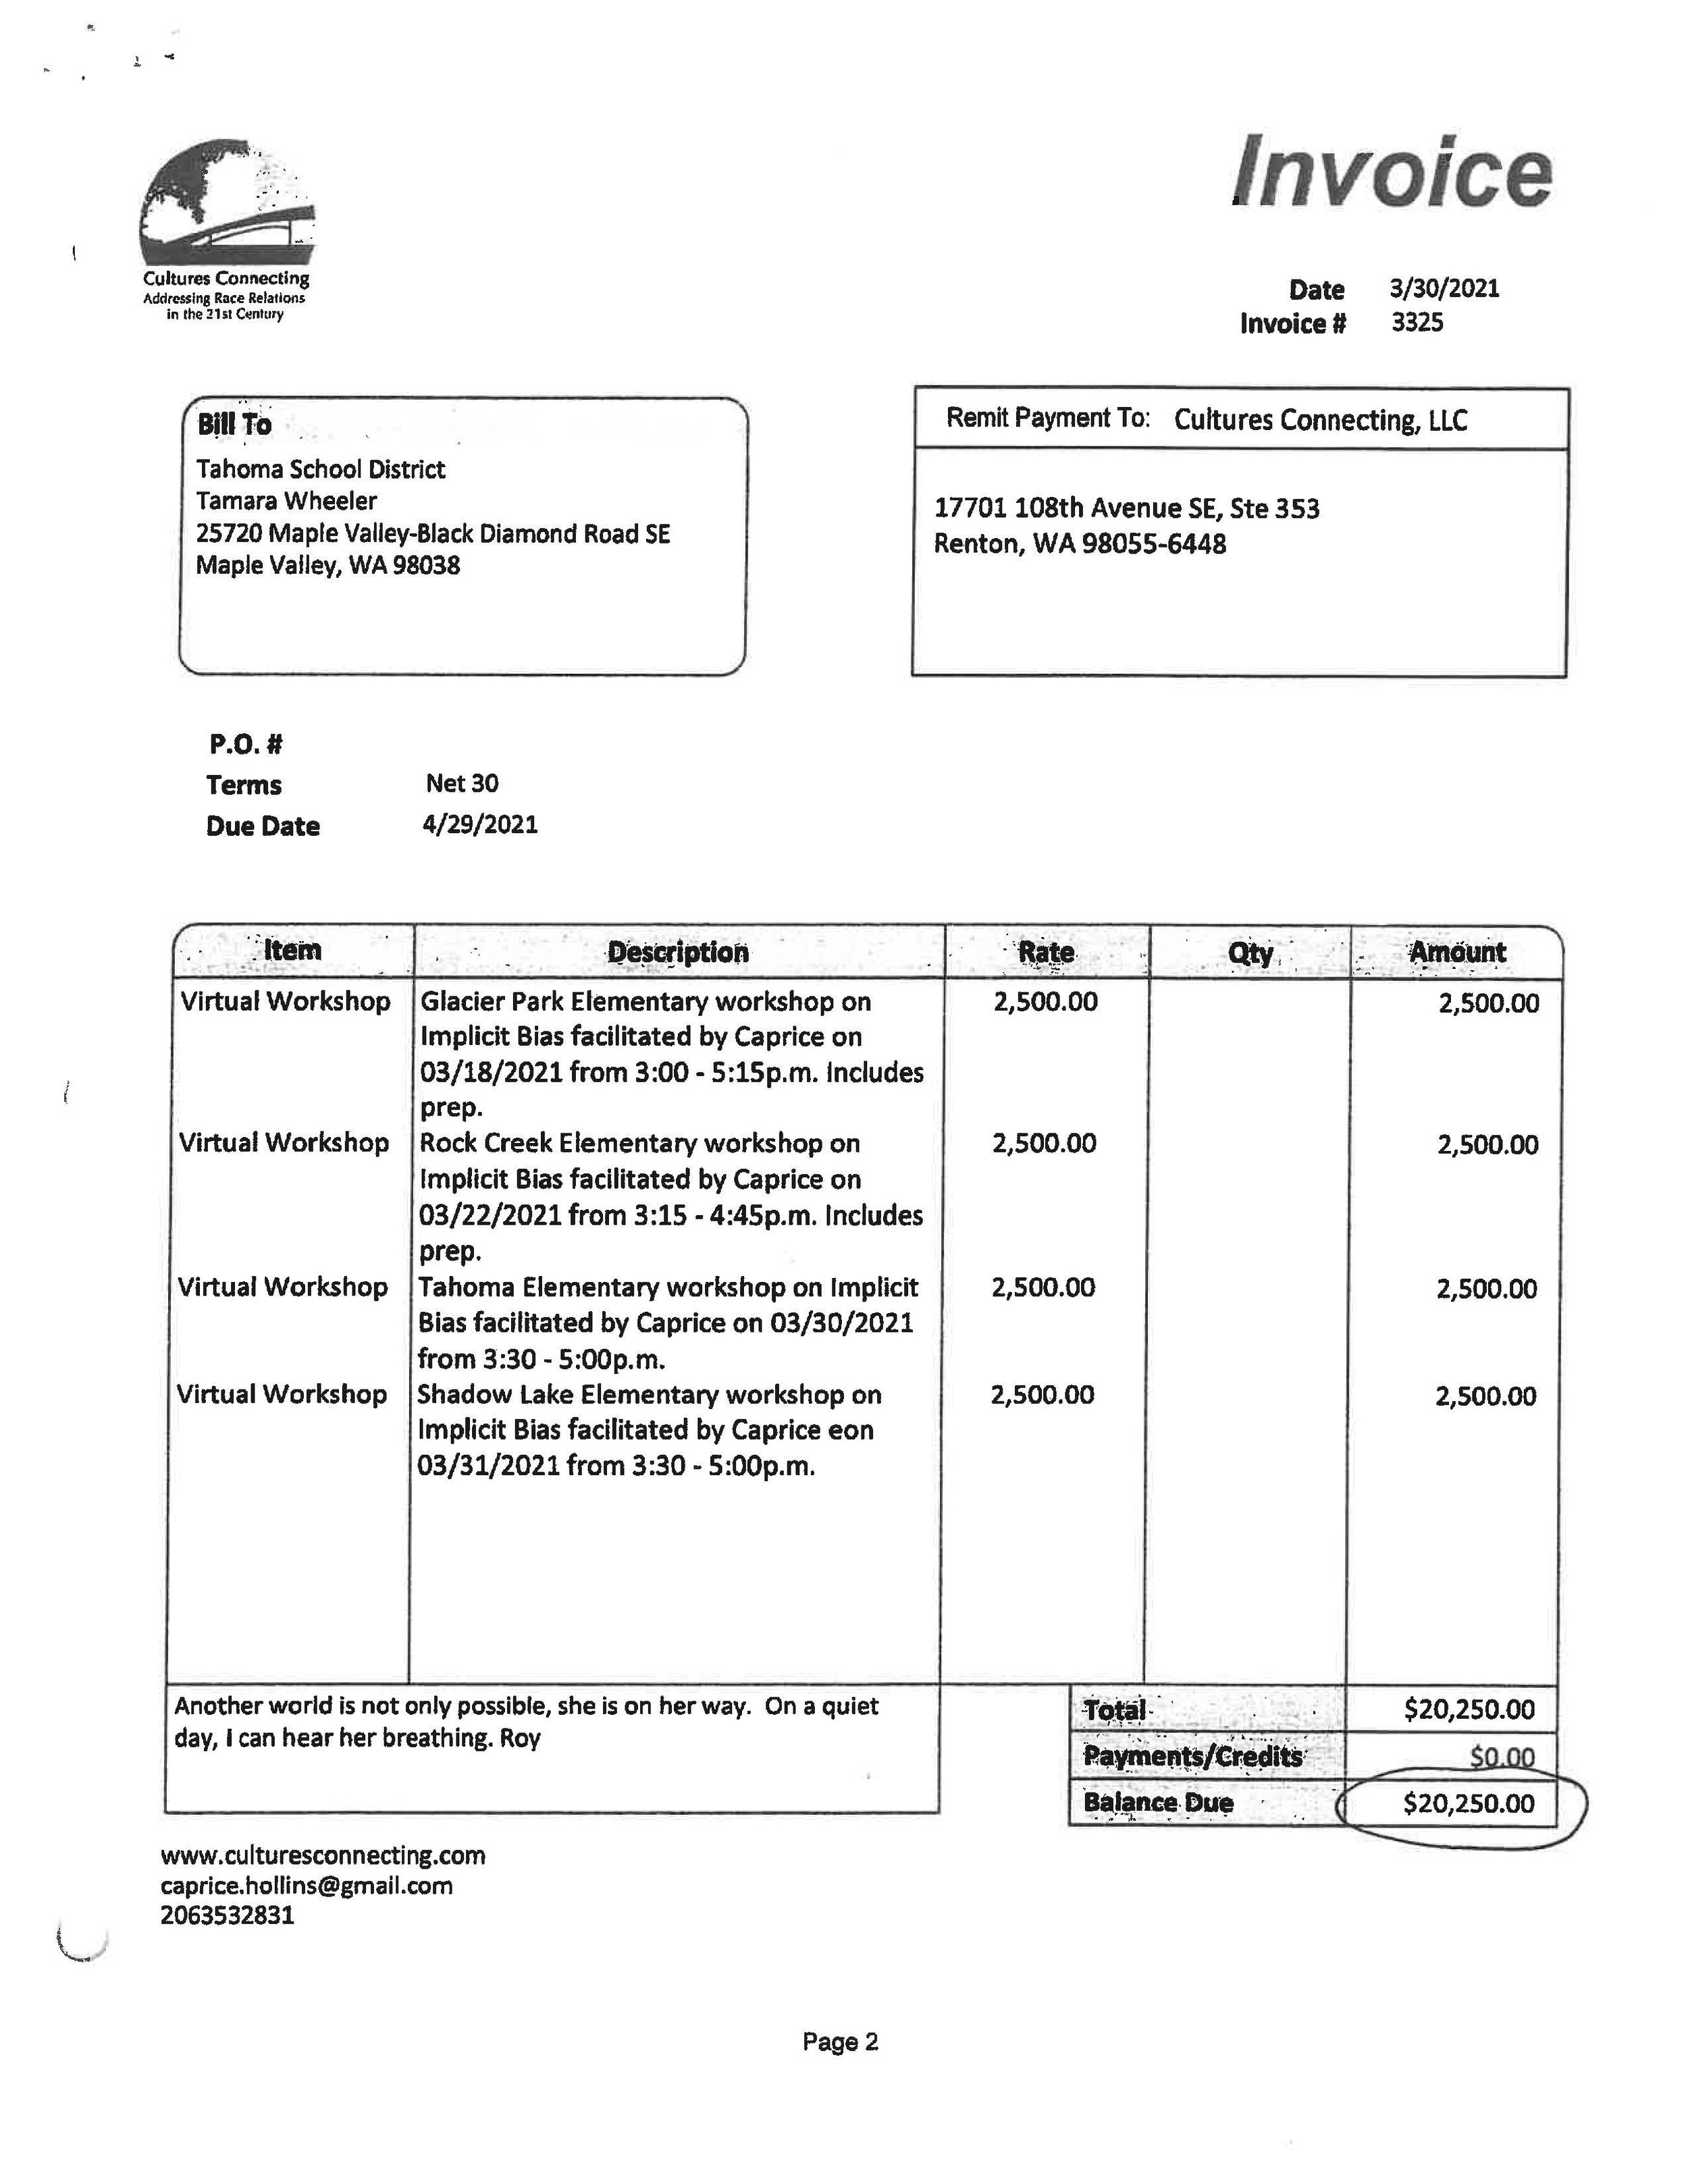 CH invoices_Page_10.jpg